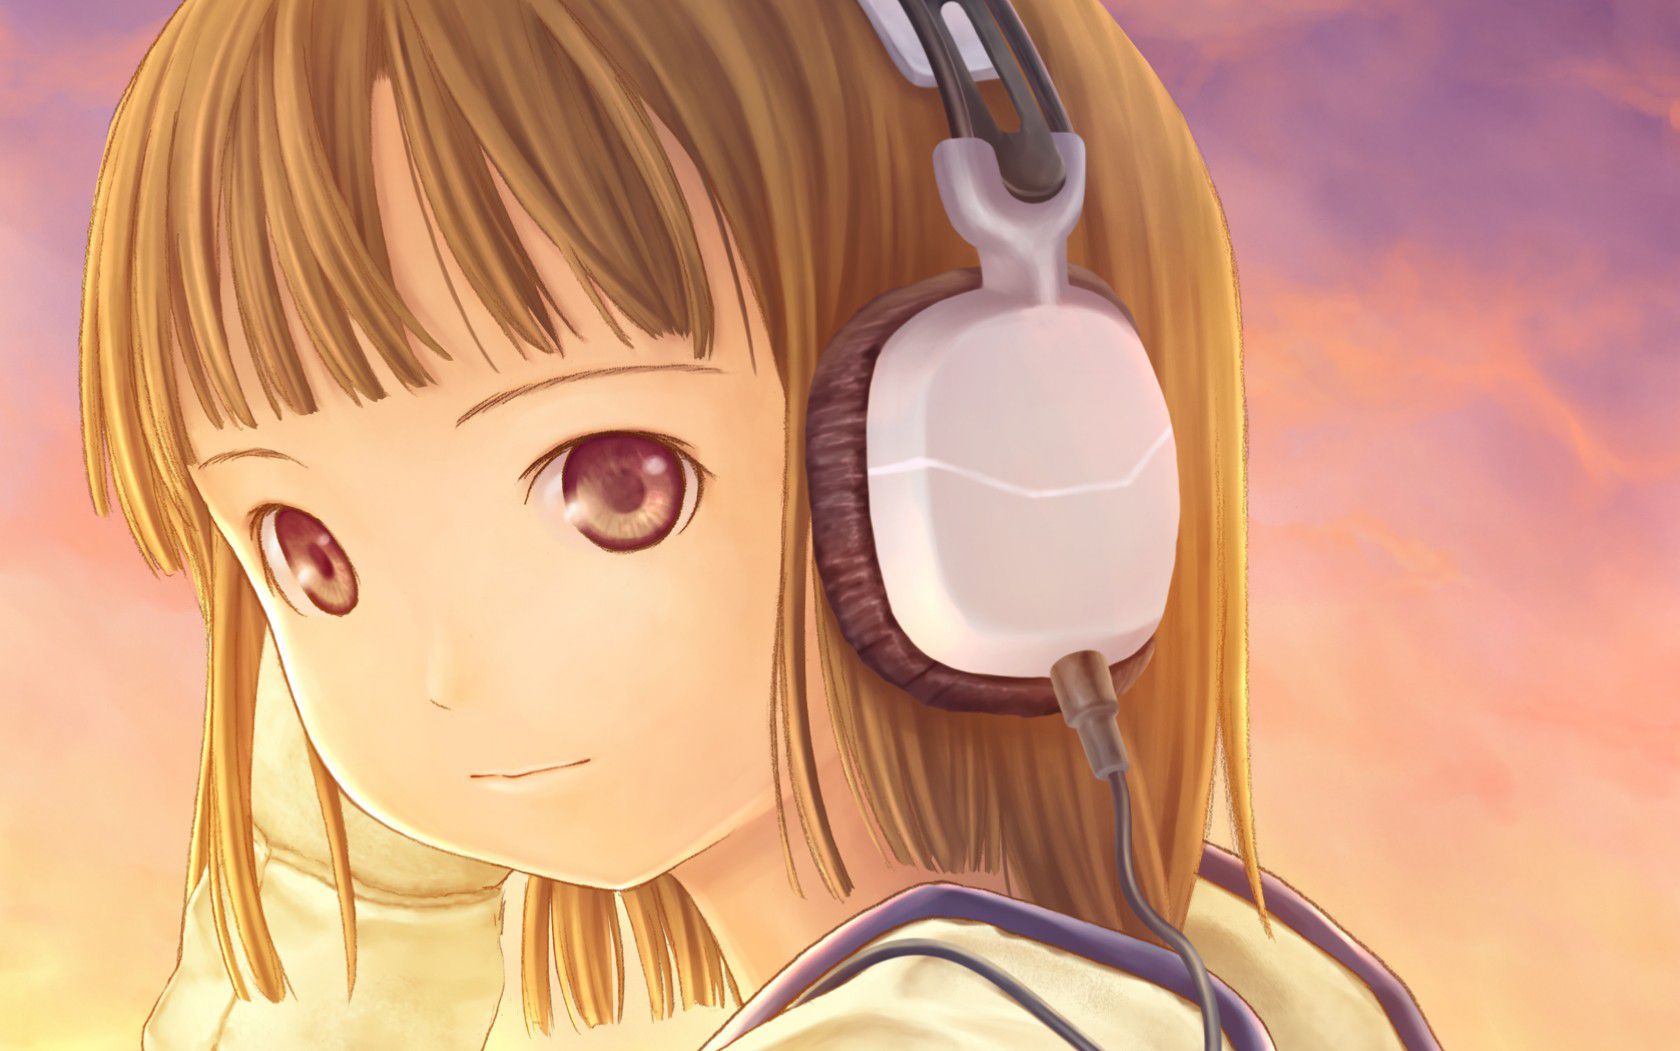 [Secondary] girl I have the headphones (headphones) [images] 19